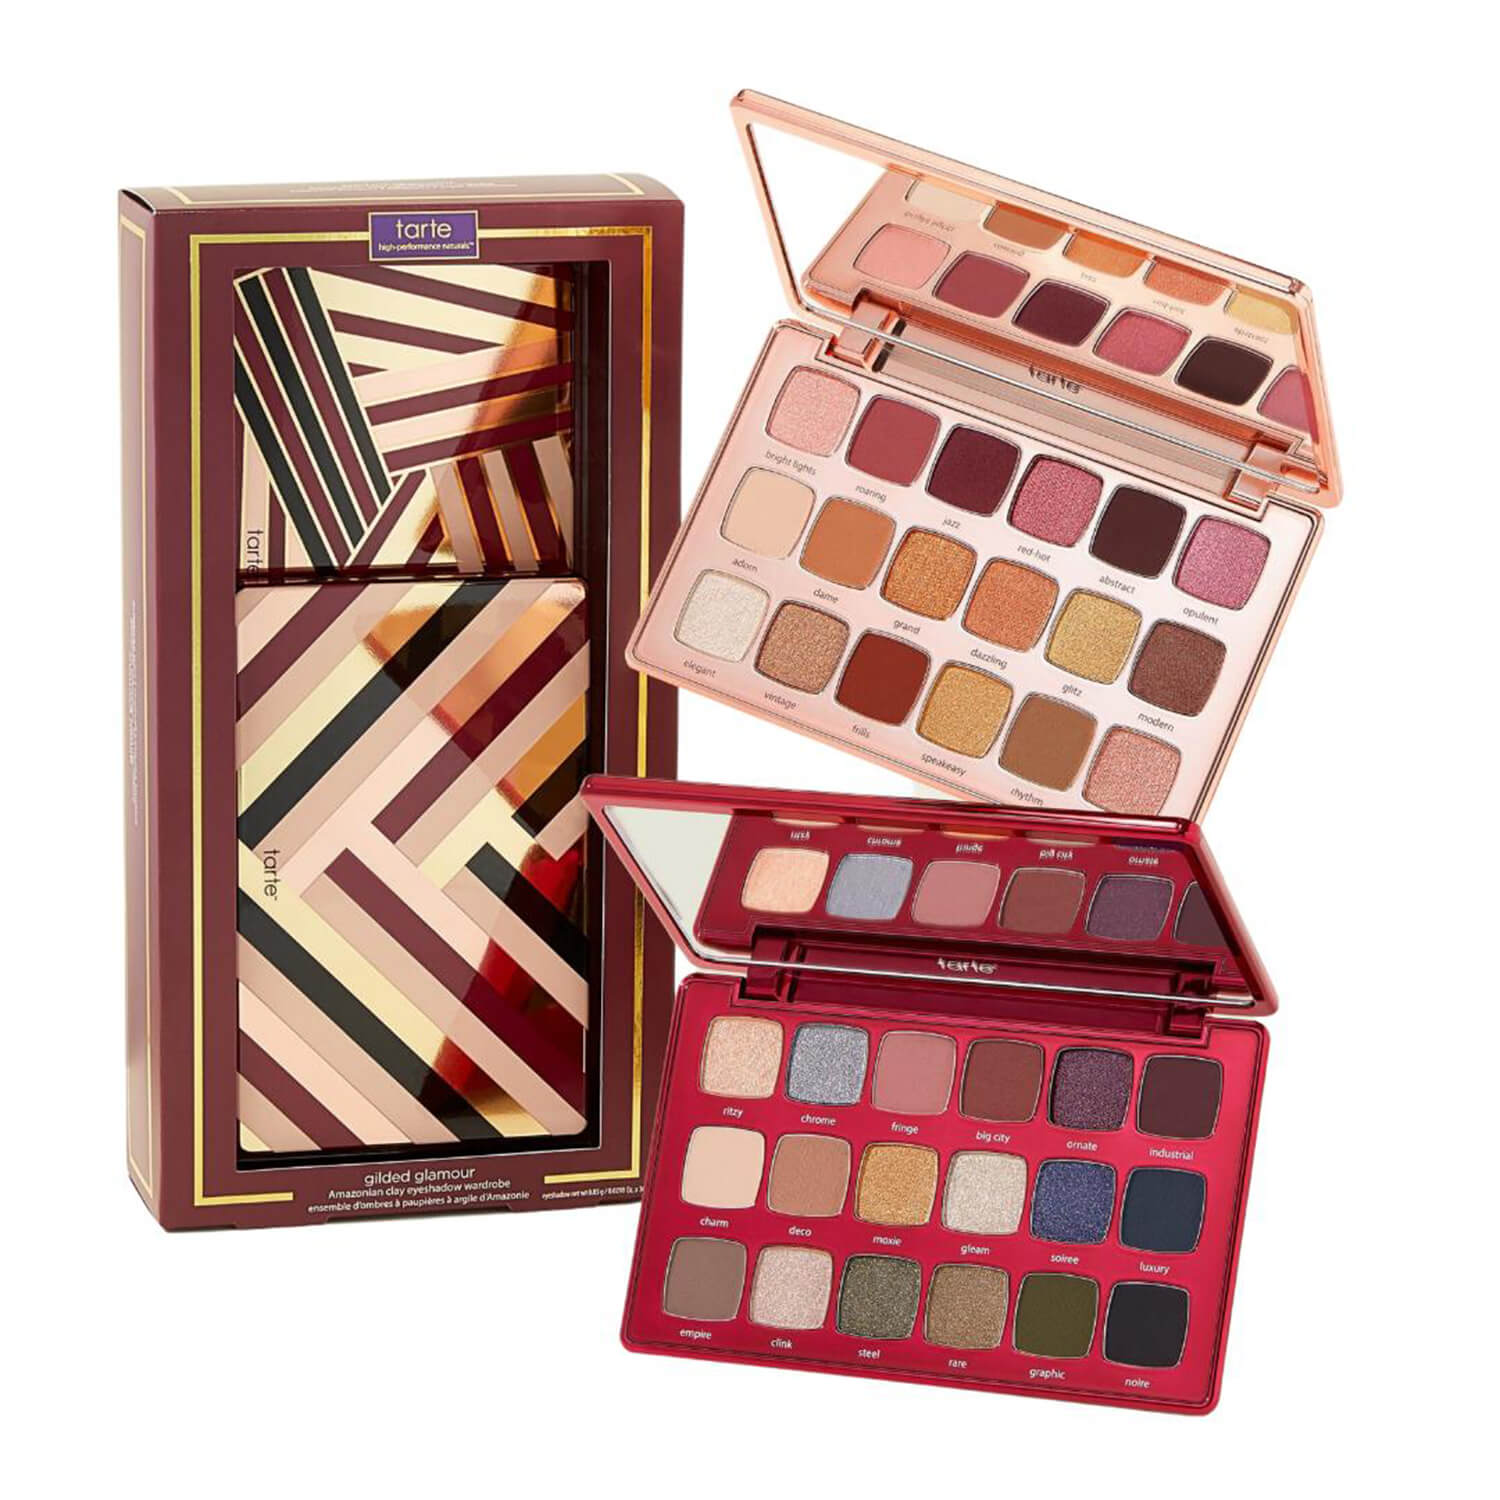 Shop Tarte Amazonian Clay Eyeshadow Wardrobe Set available at Heygirl.pk for delivery in Pakistan. 